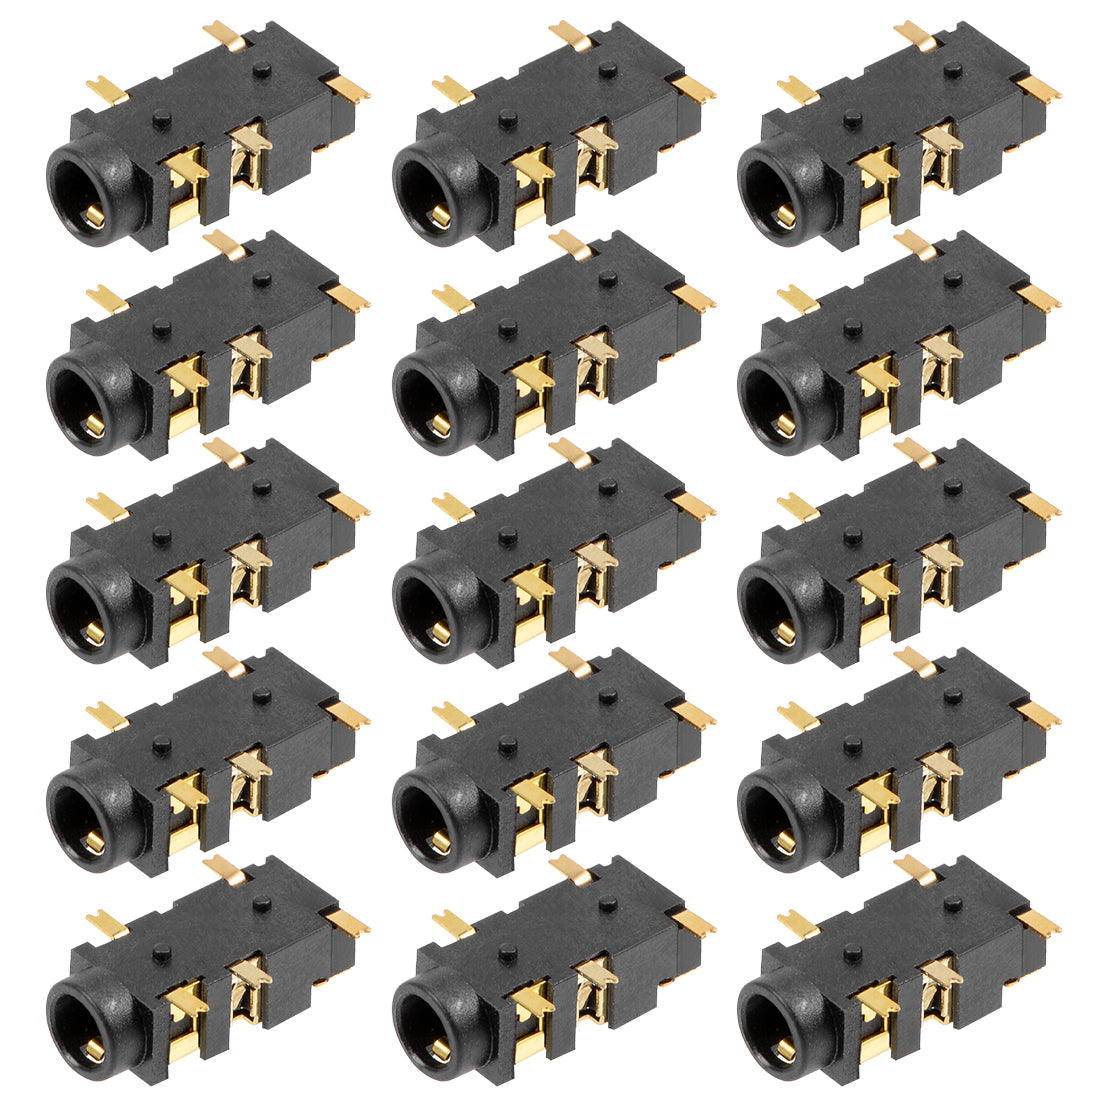 uxcell Uxcell PCB Mount 3.5mm 5 Pin Socket Headphone Stereo Jack Audio Video Connector Black PJ327E 15Pcs